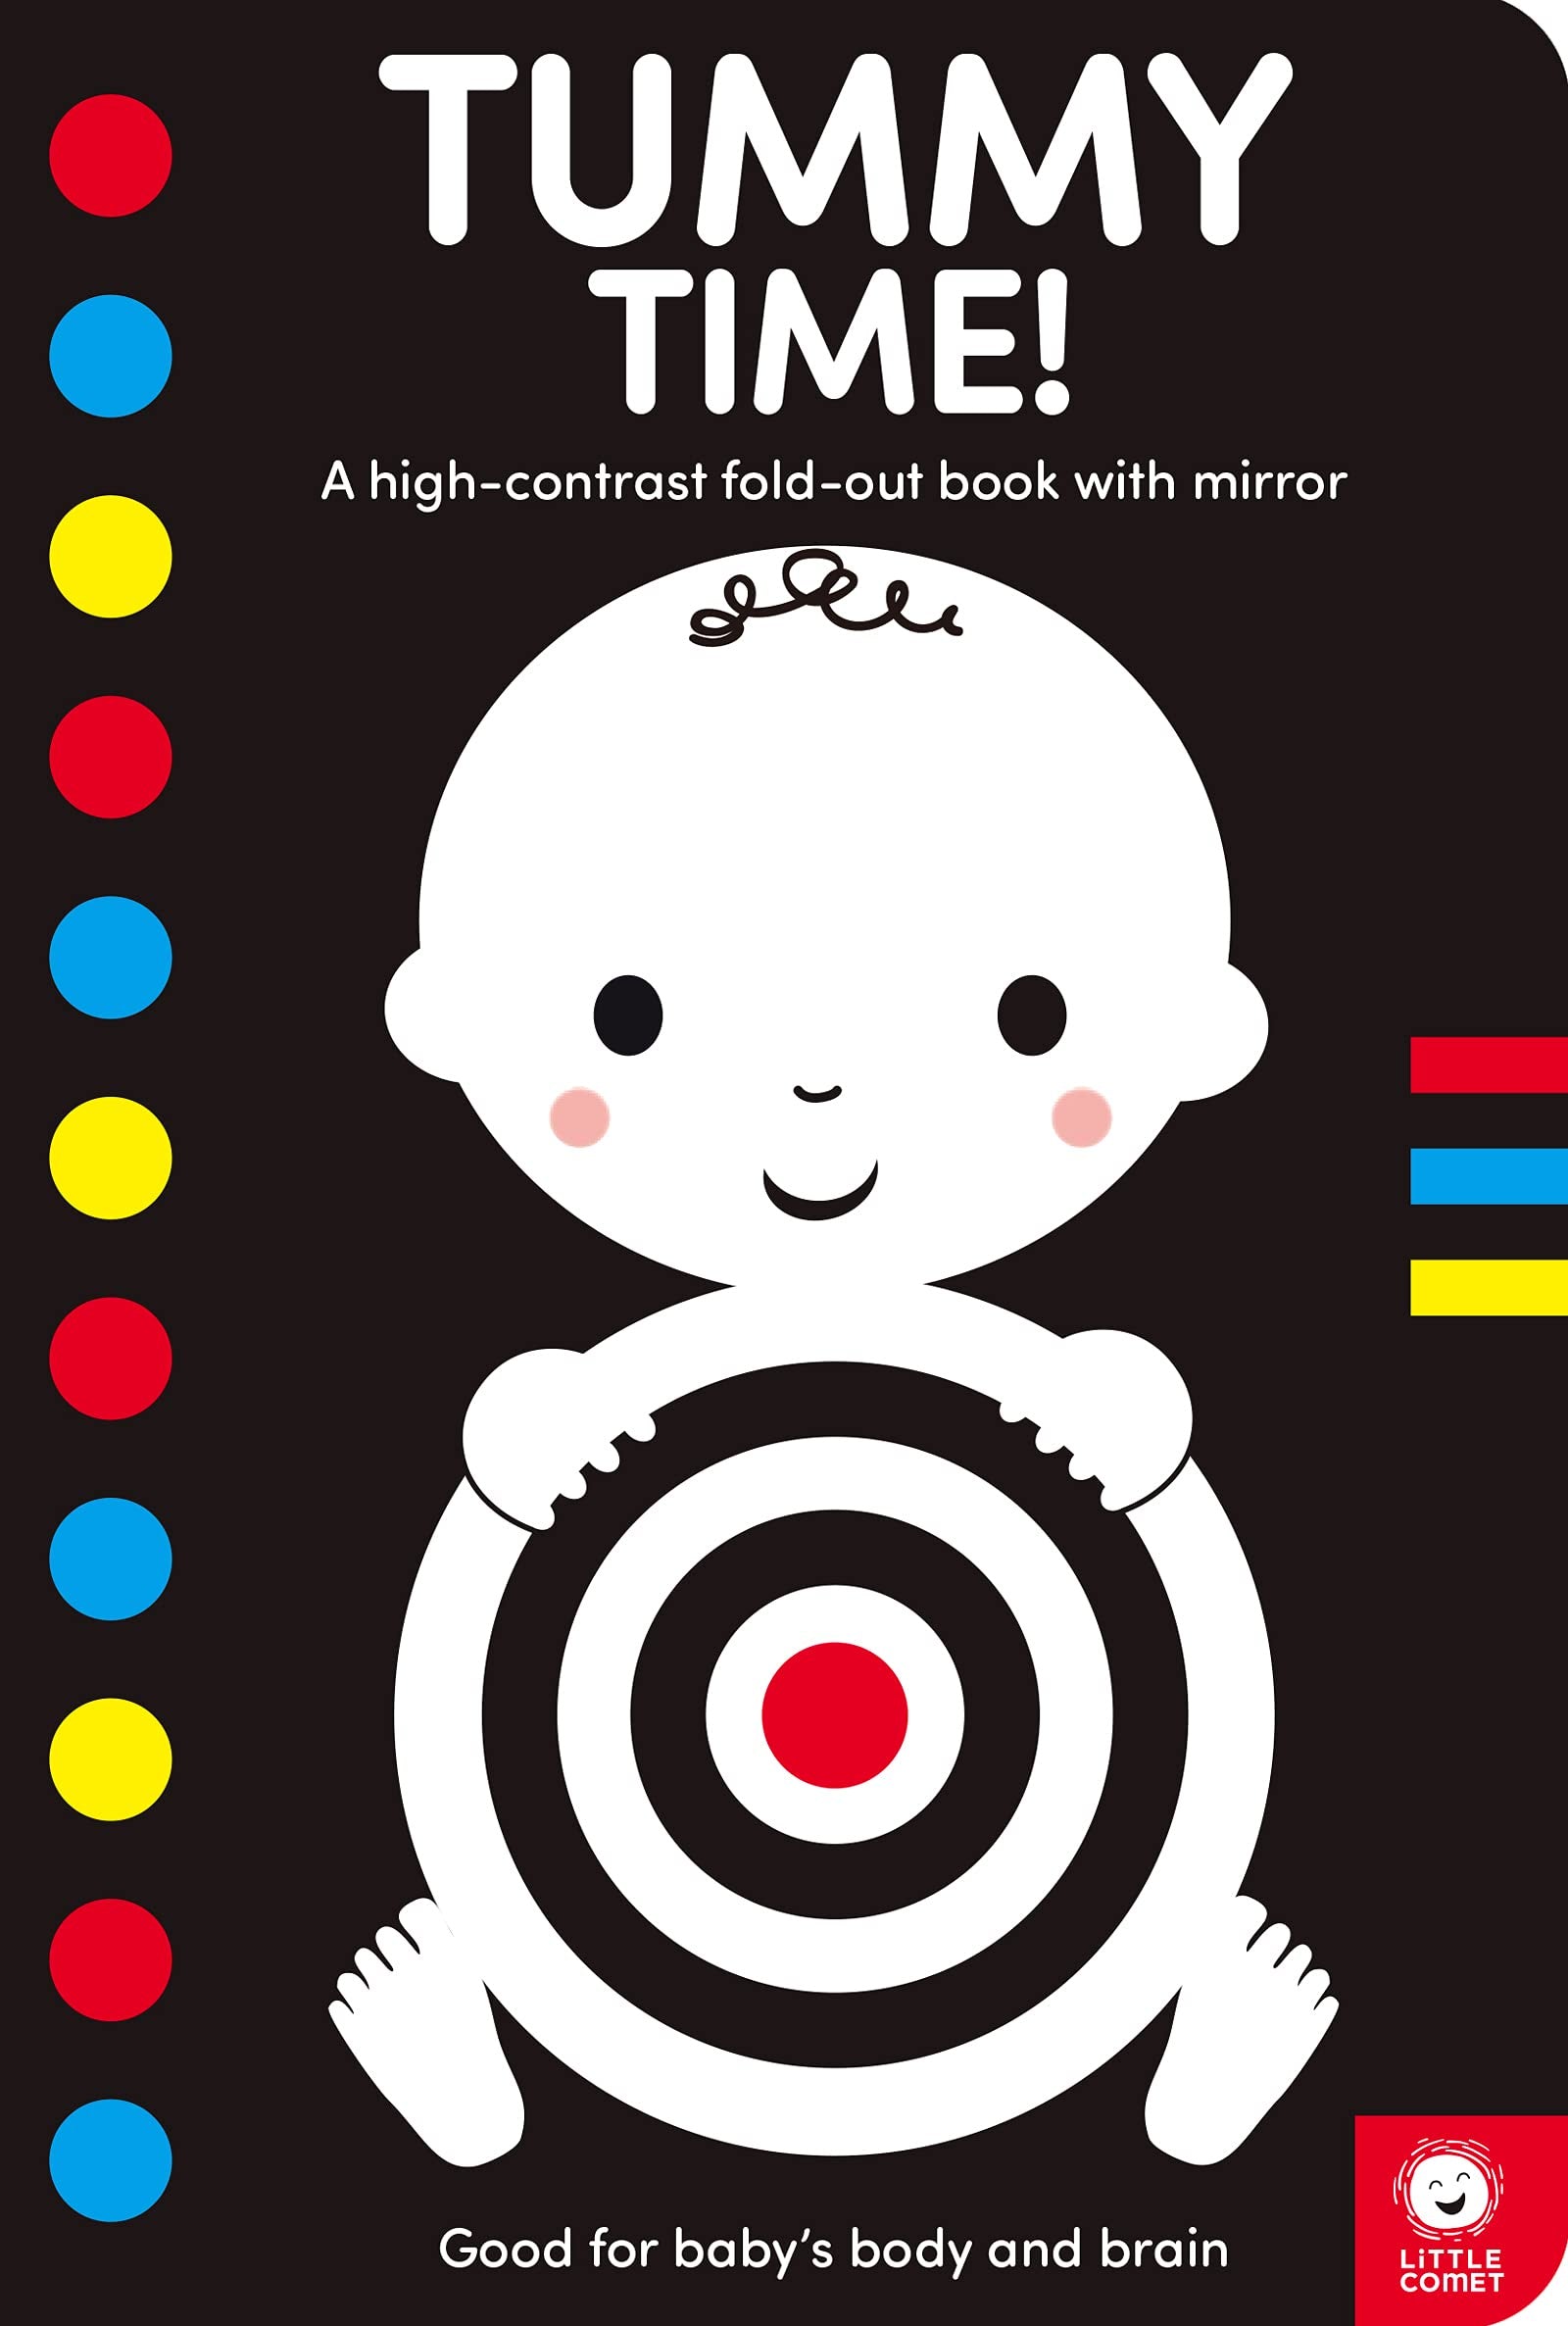 Tummy Time! A high-contrast fold-out book with mirror for babies